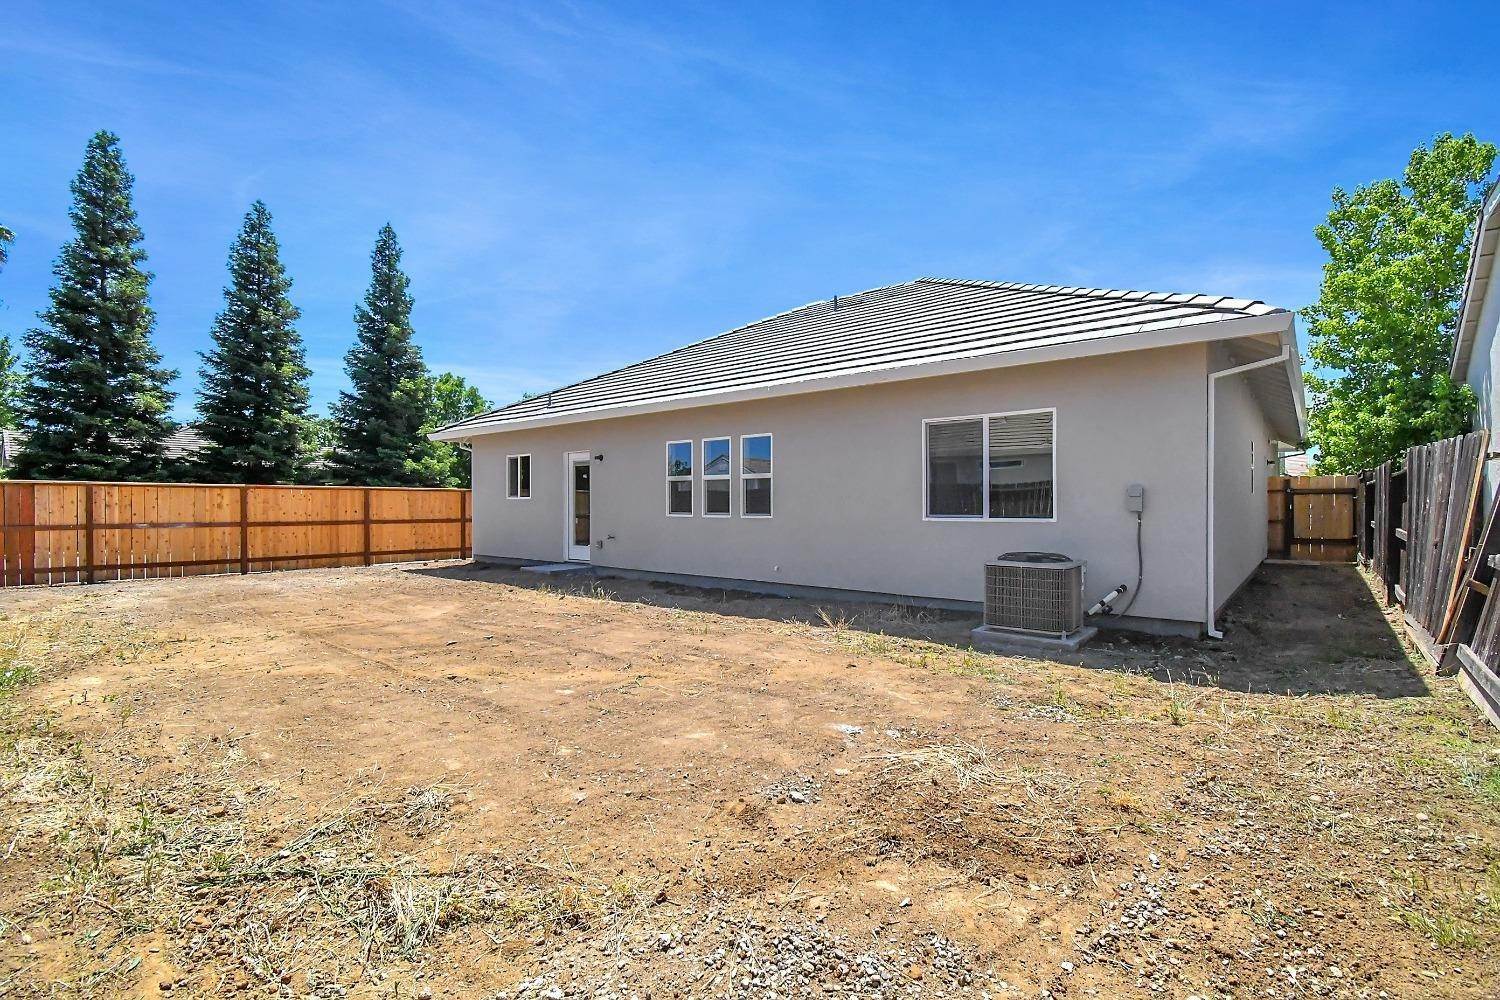 37. Single Family Homes for Active at 1900 Northern Pintail Court Gridley, California 95948 United States